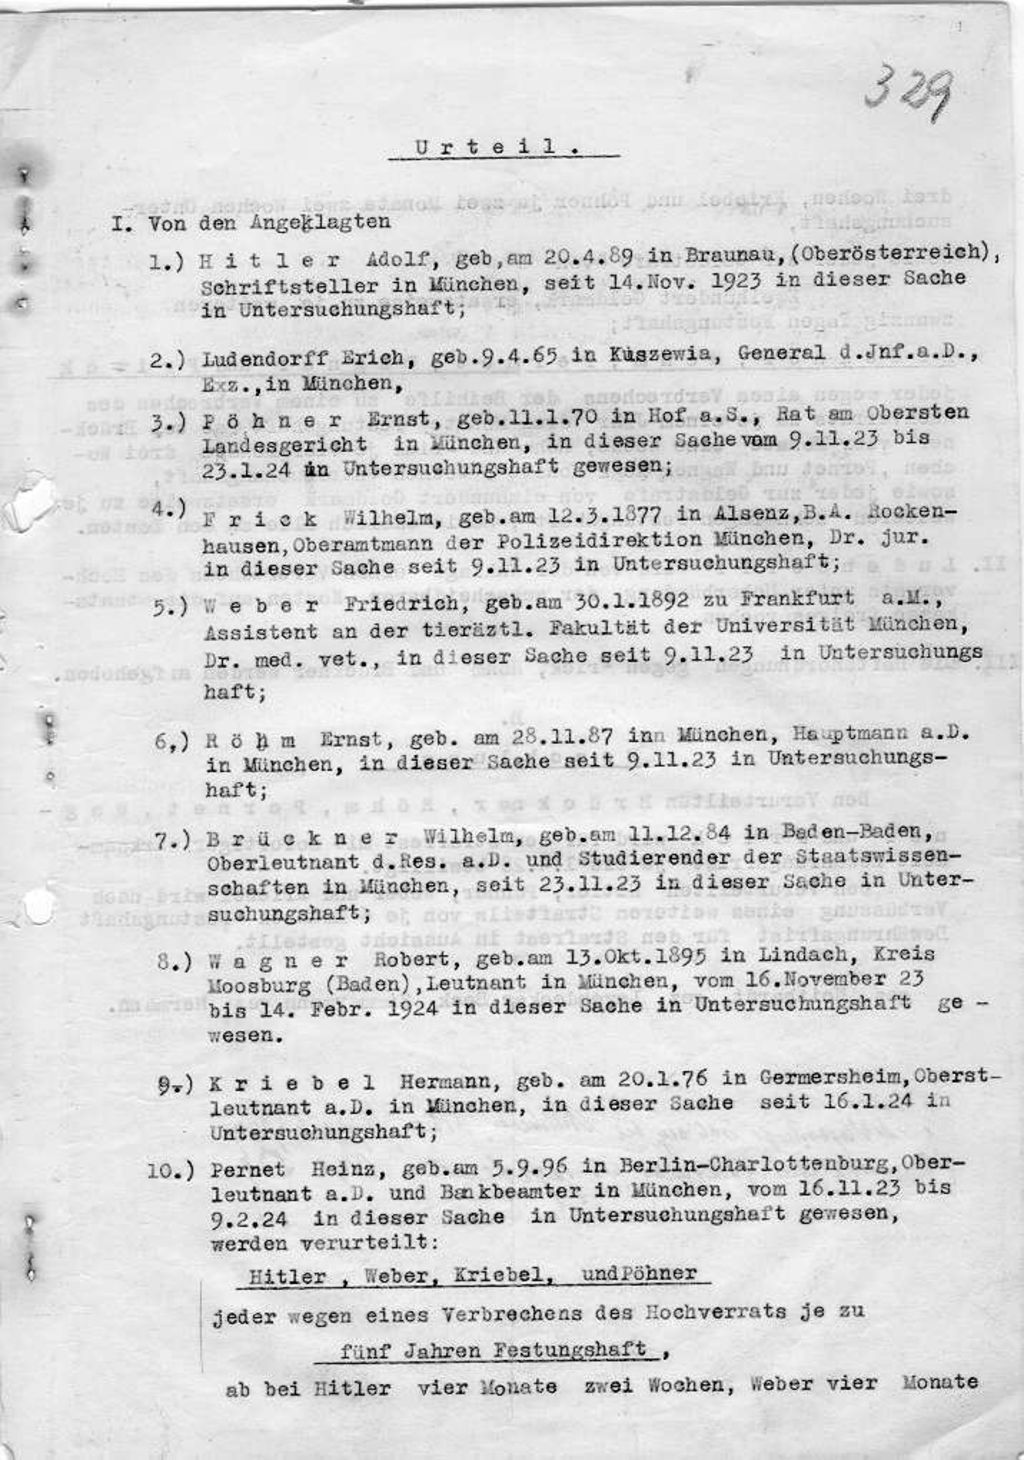 Cover sheet of the judgment of the putsch trial listing personal details of the accused and their sentence